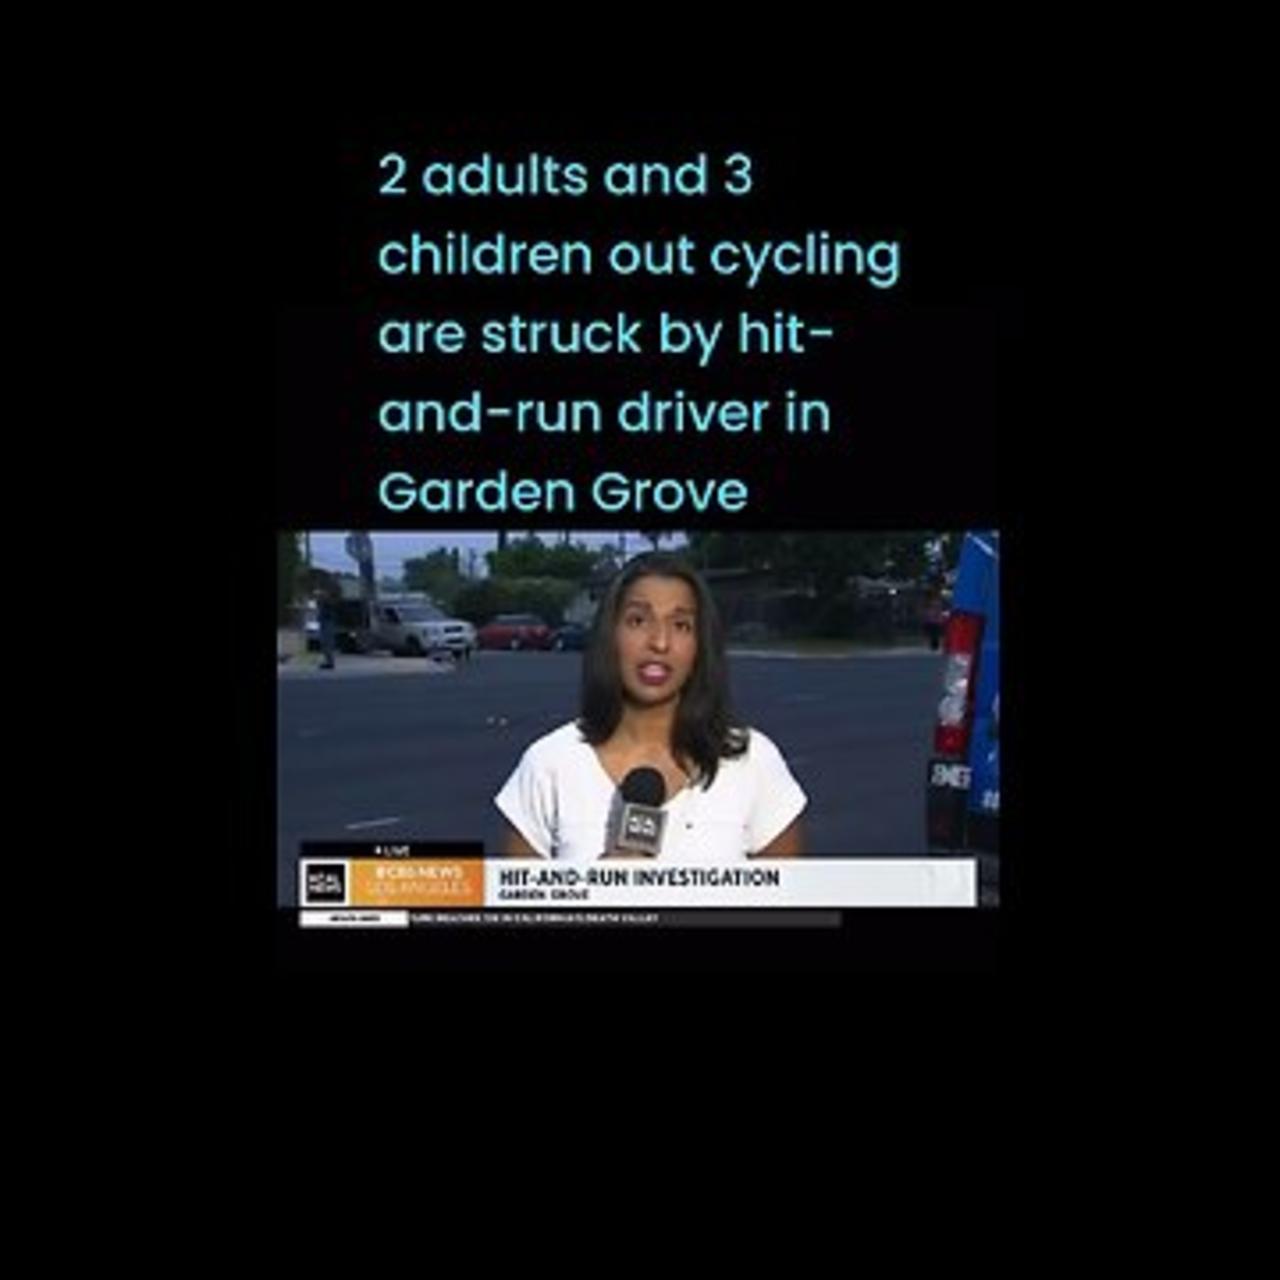 2 adults and 3 children out cycling are struck by hit-and-run driver in Garden Grove #lioneyenews